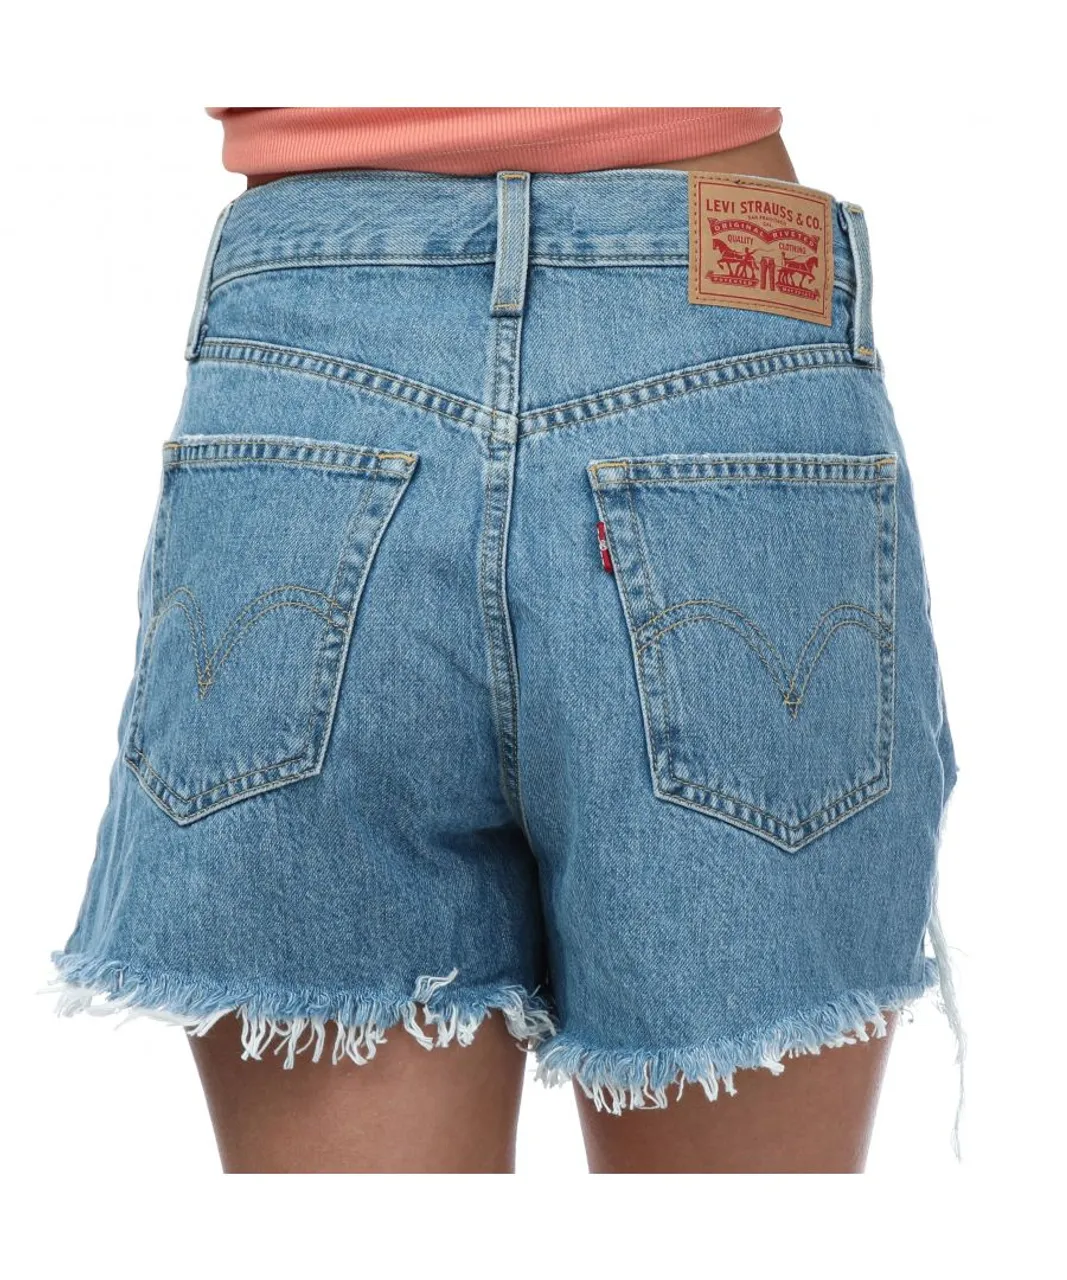 Levi's Womenss Levis High Waisted Mom Shorts in Denim - Blue Cotton